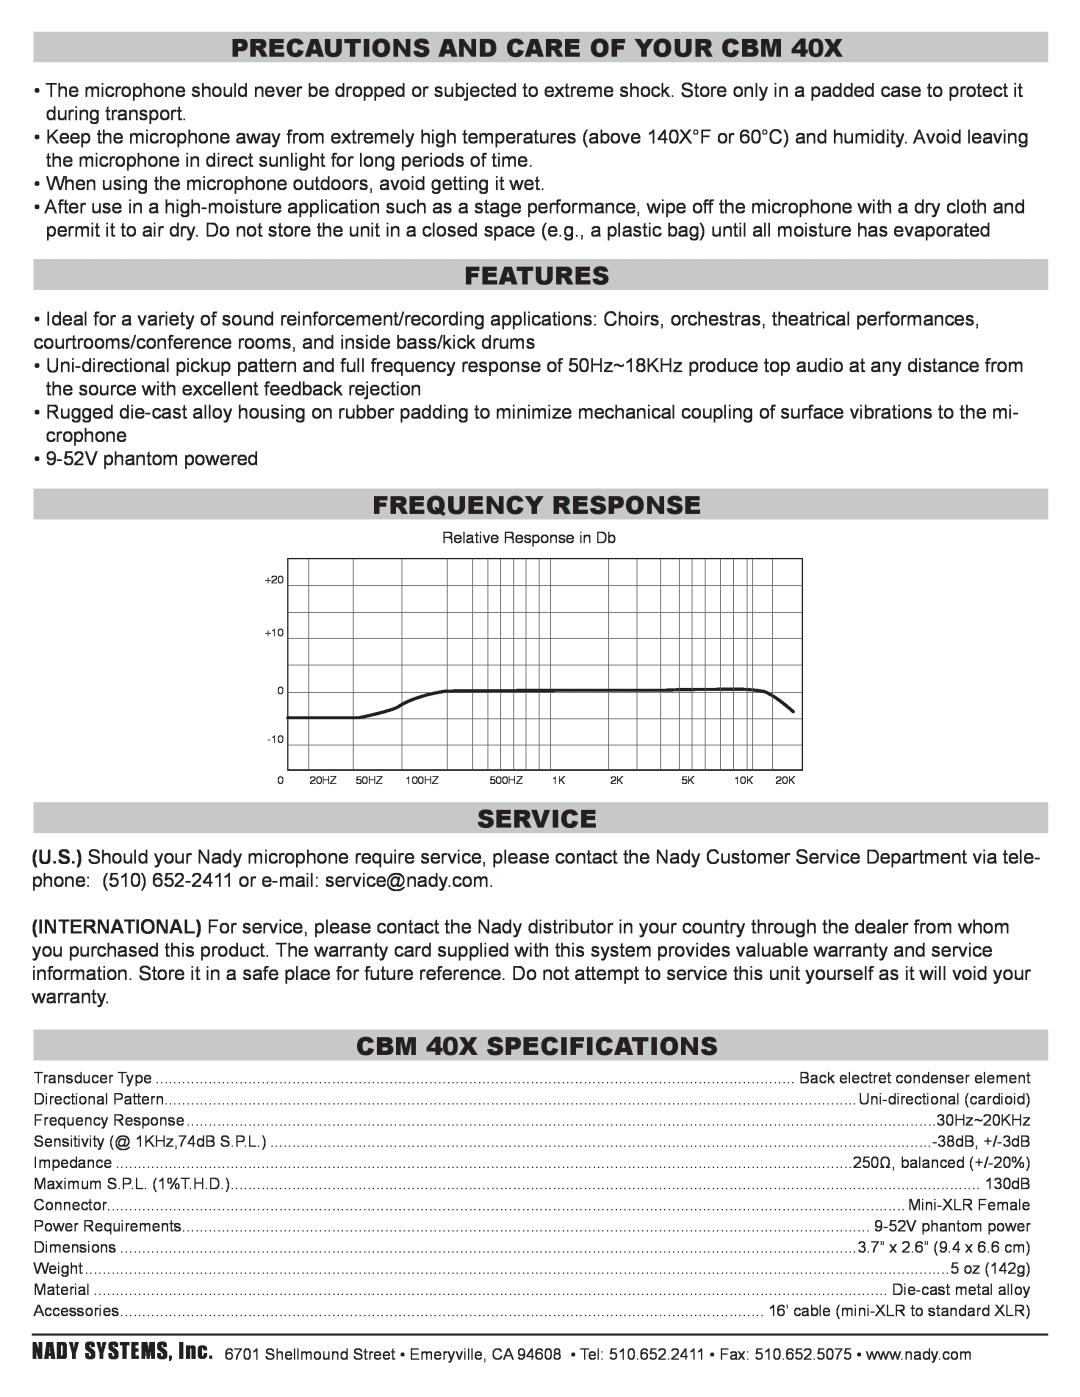 Nady Systems manual Precautions And Care Of Your Cbm, Features, Frequency Response, Service, CBM 40X SPECIFICATIONS 